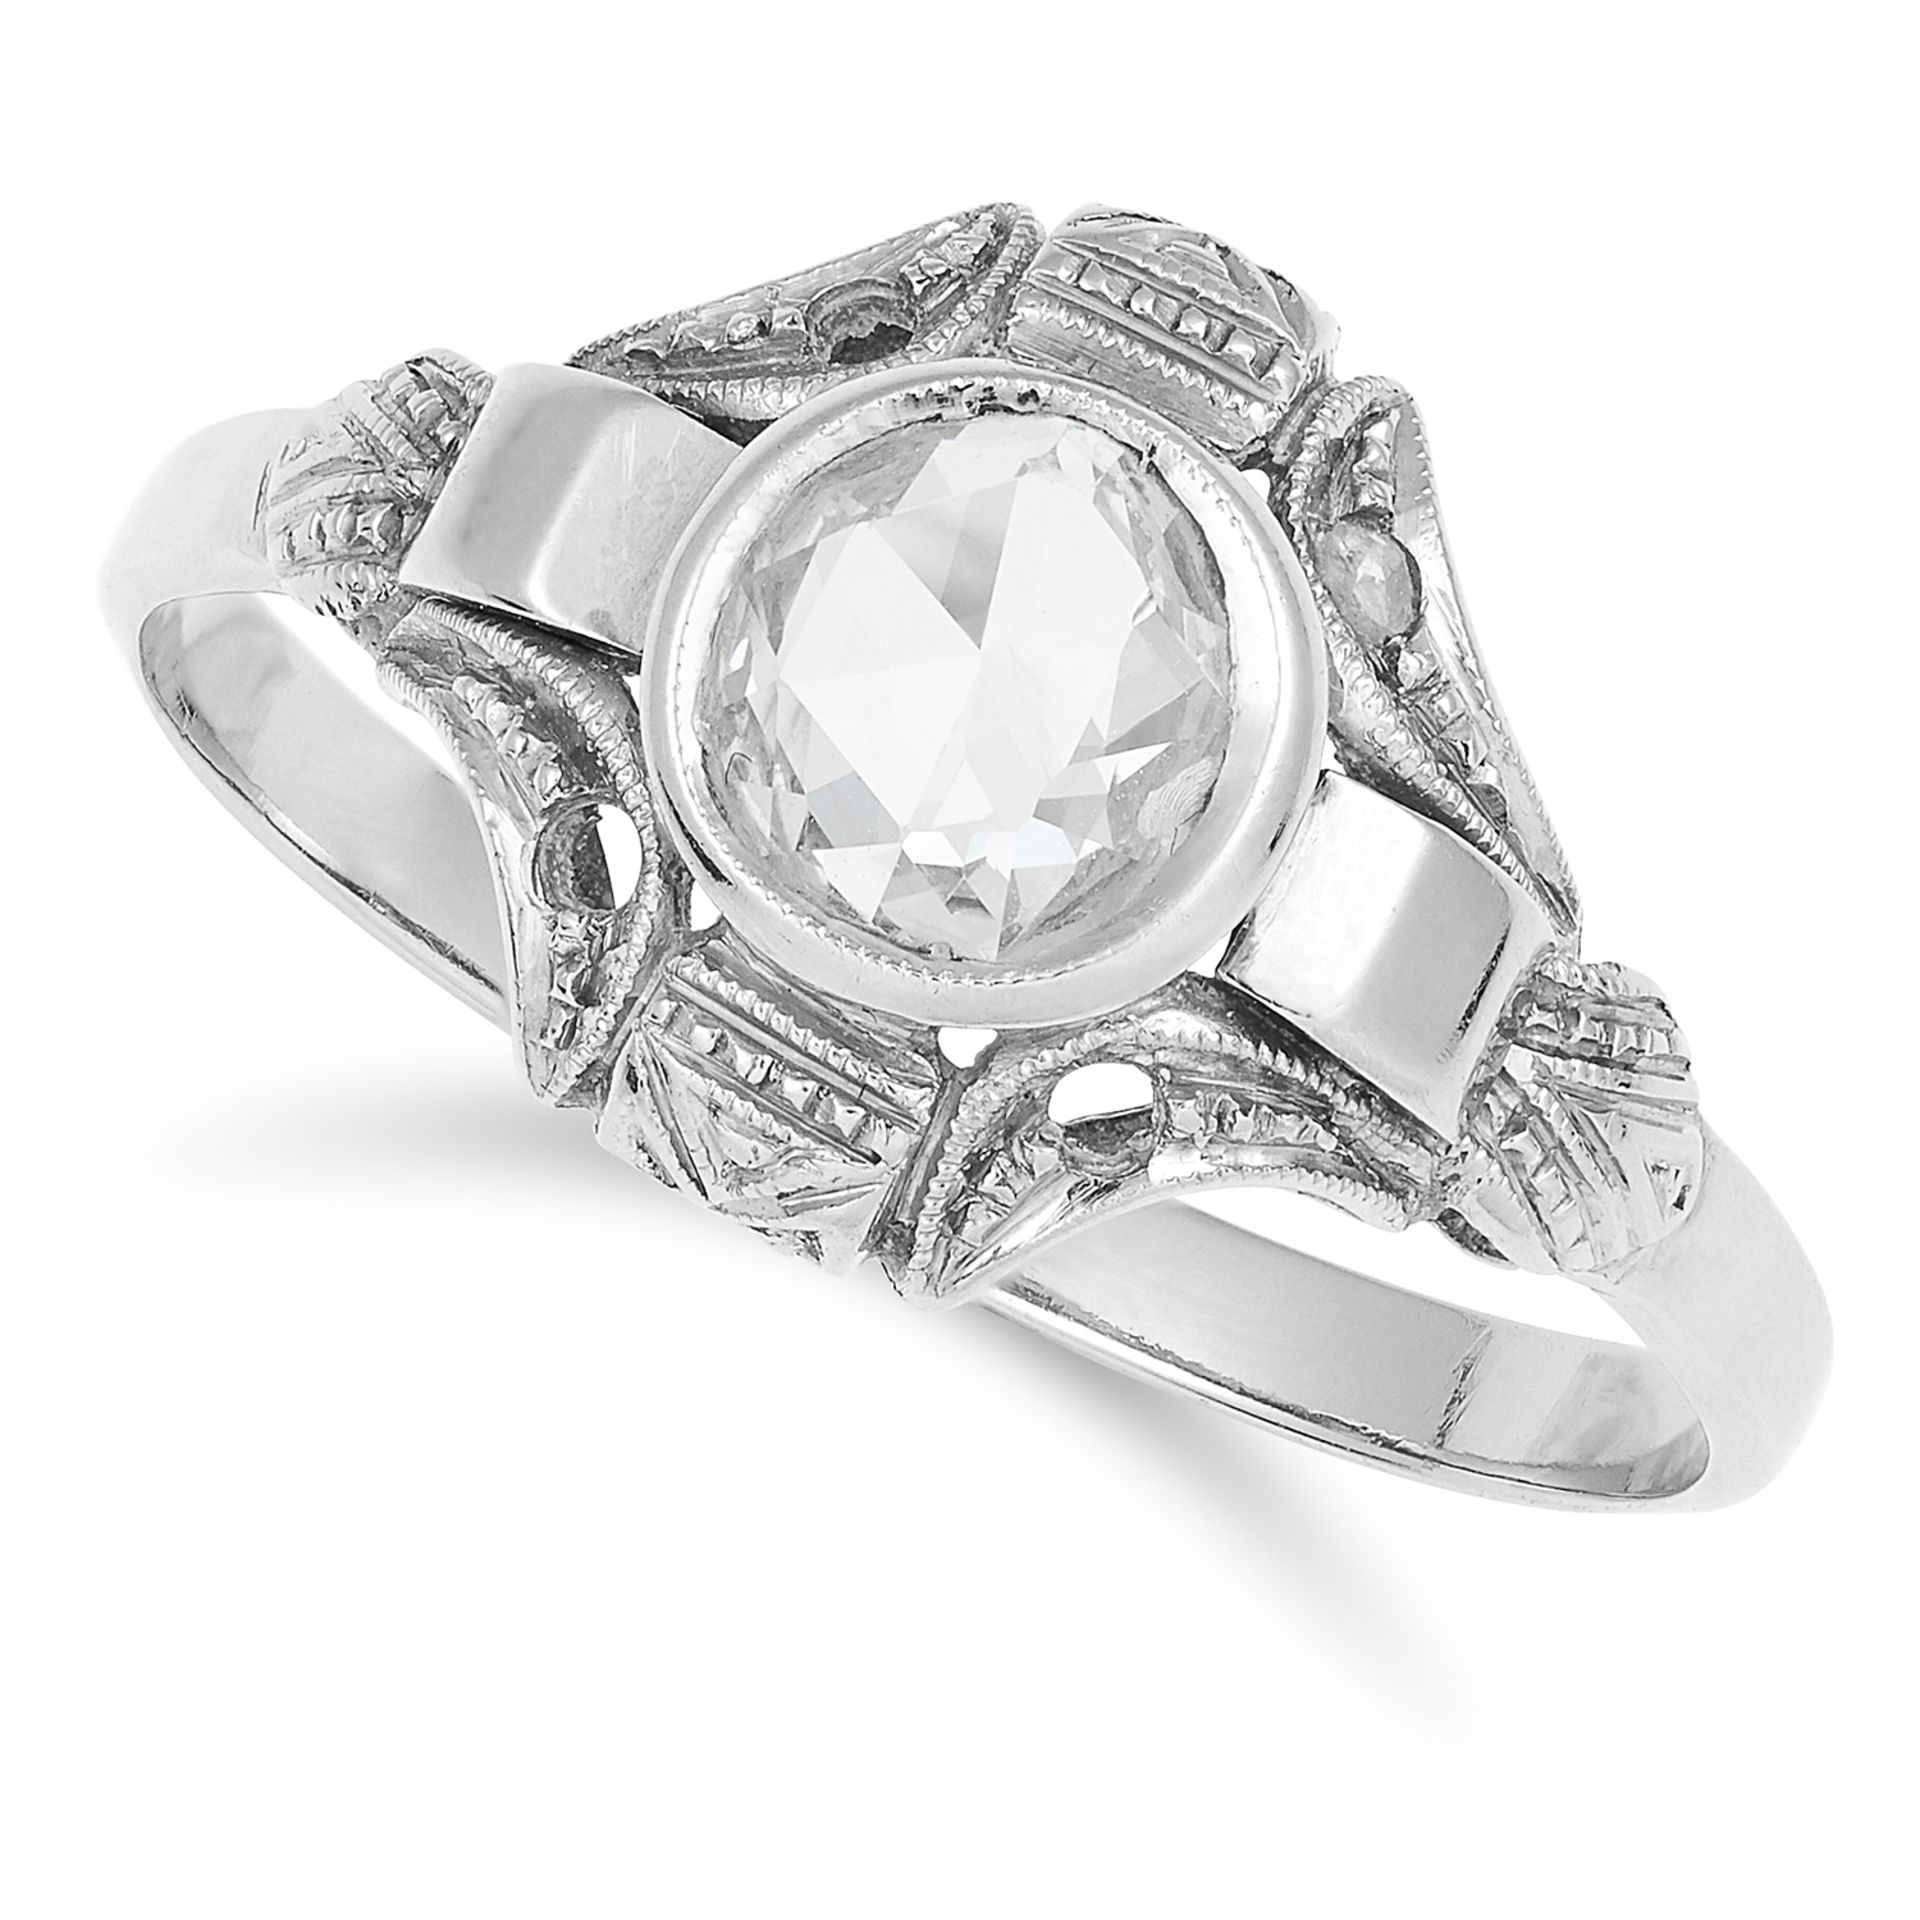 DIAMOND DRESS RING in Art Deco style, set with a rose cut diamond, size P / 7.5, 2.0g.